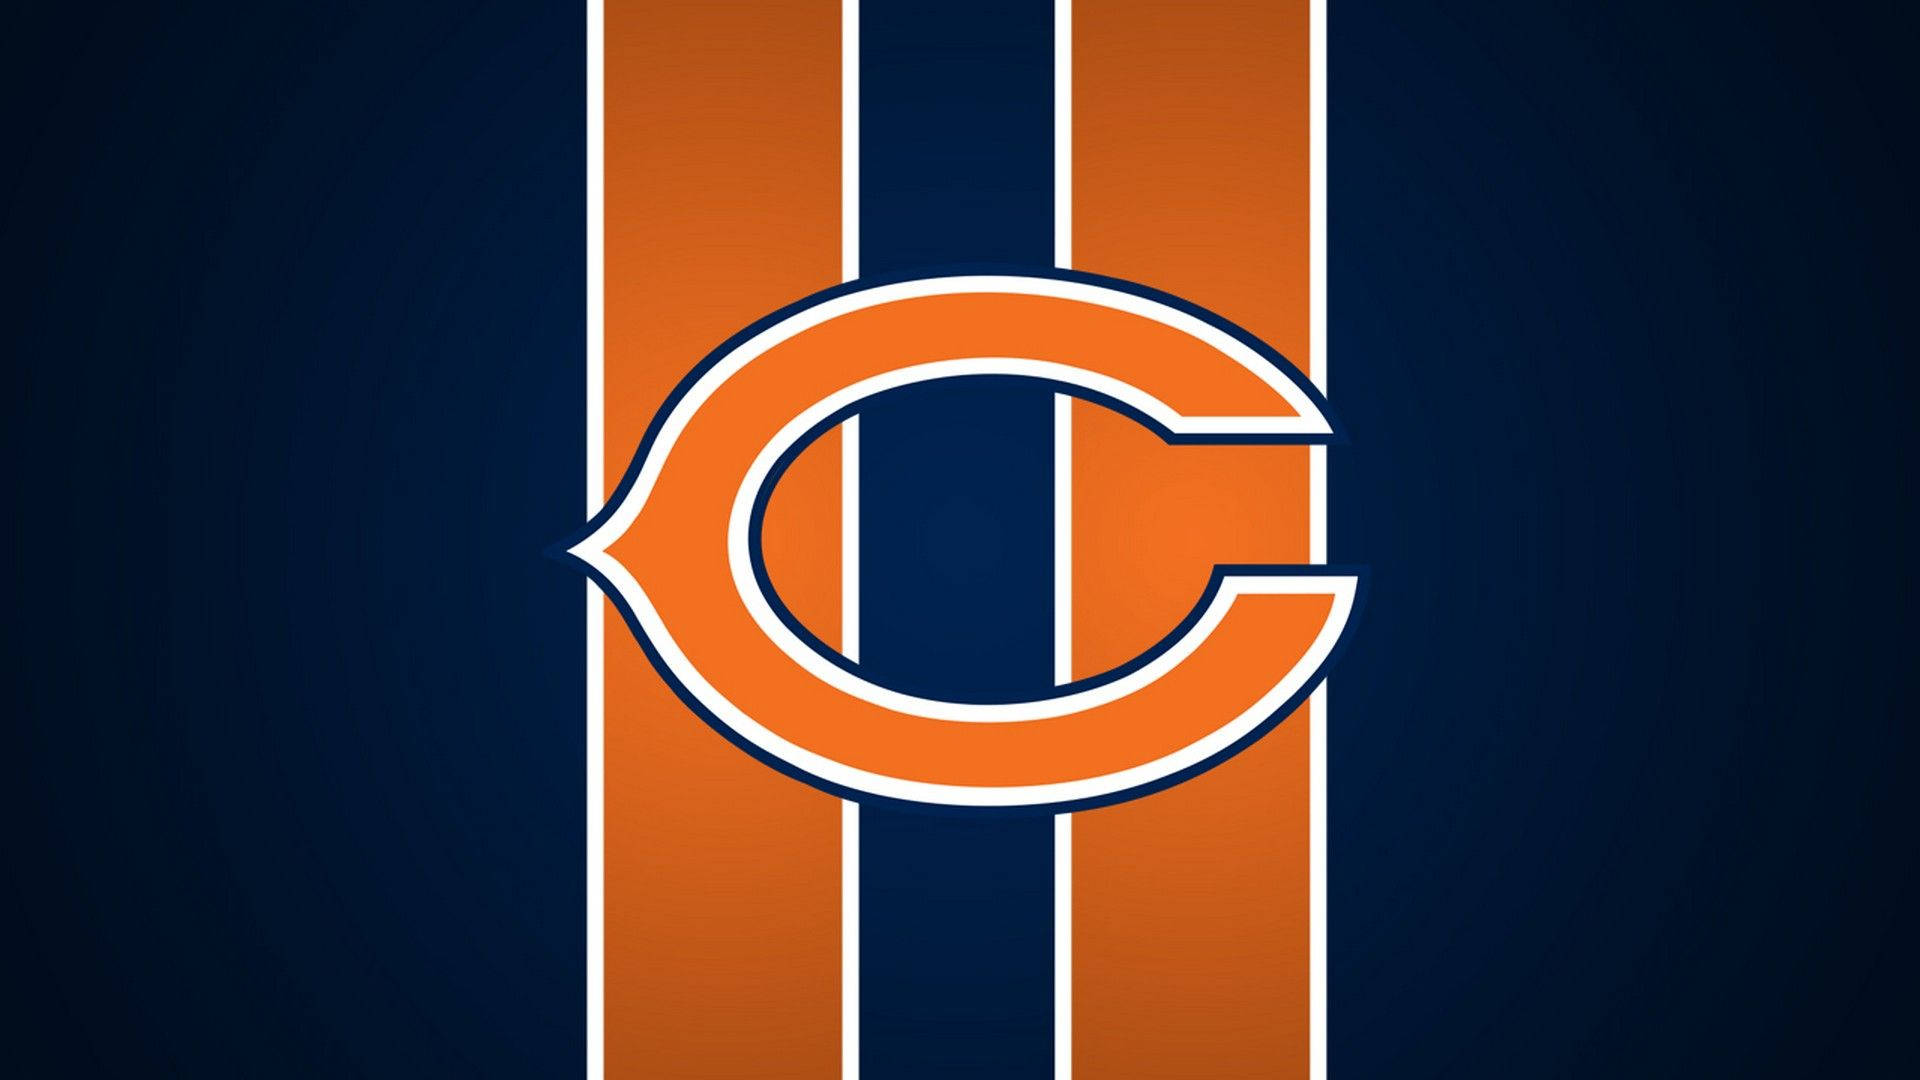 The Chicago Bears look to make history in the 2019-2020 NFL season Wallpaper